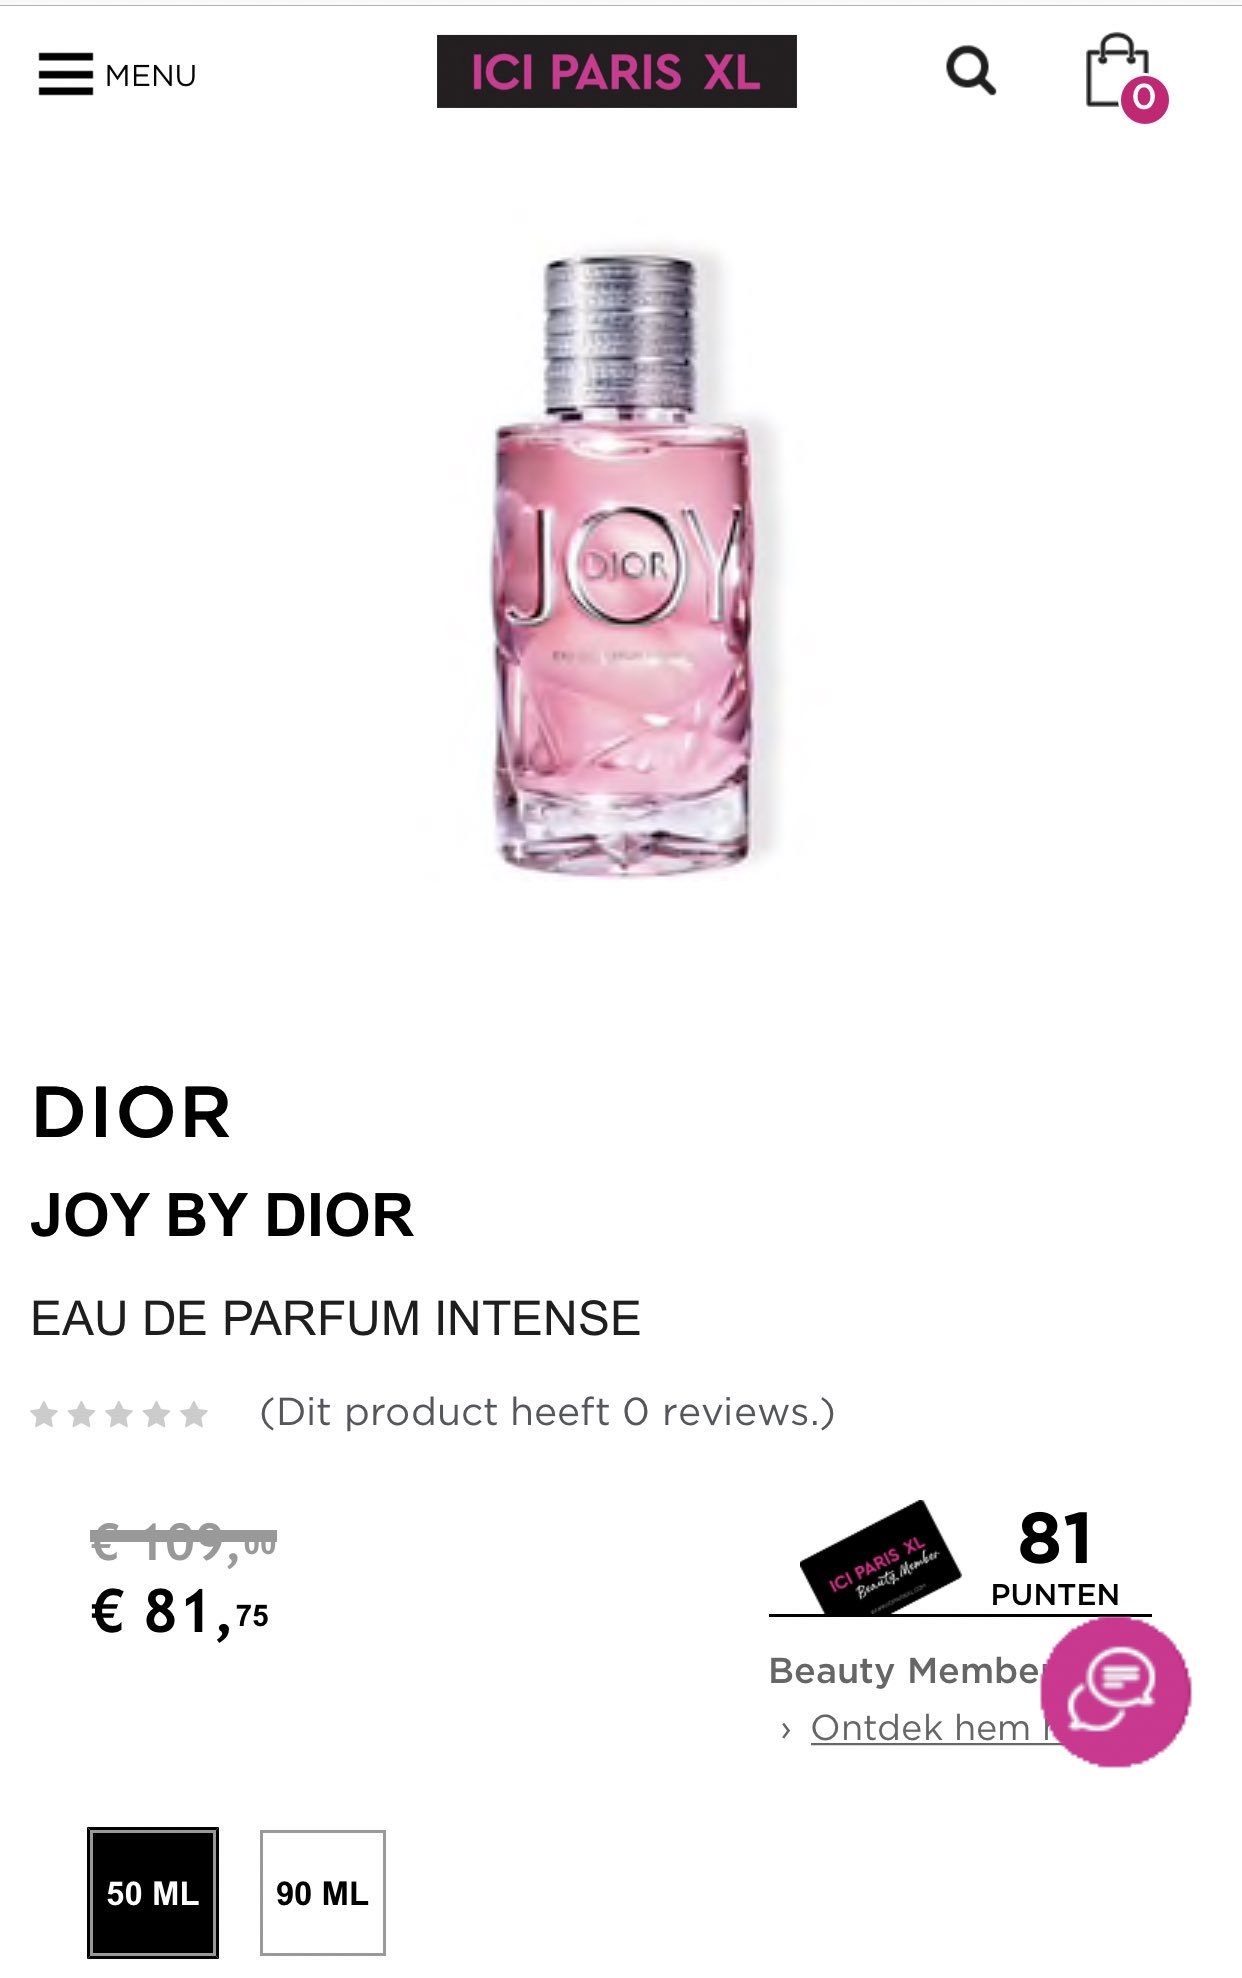 Uzivatel Jennifer Lawrence Updates Na Twitteru The New Joy By Dior Eau De Parfum Intense Is Now Available In The Netherlands And They Have A Discount Now Should Be In Other Countries